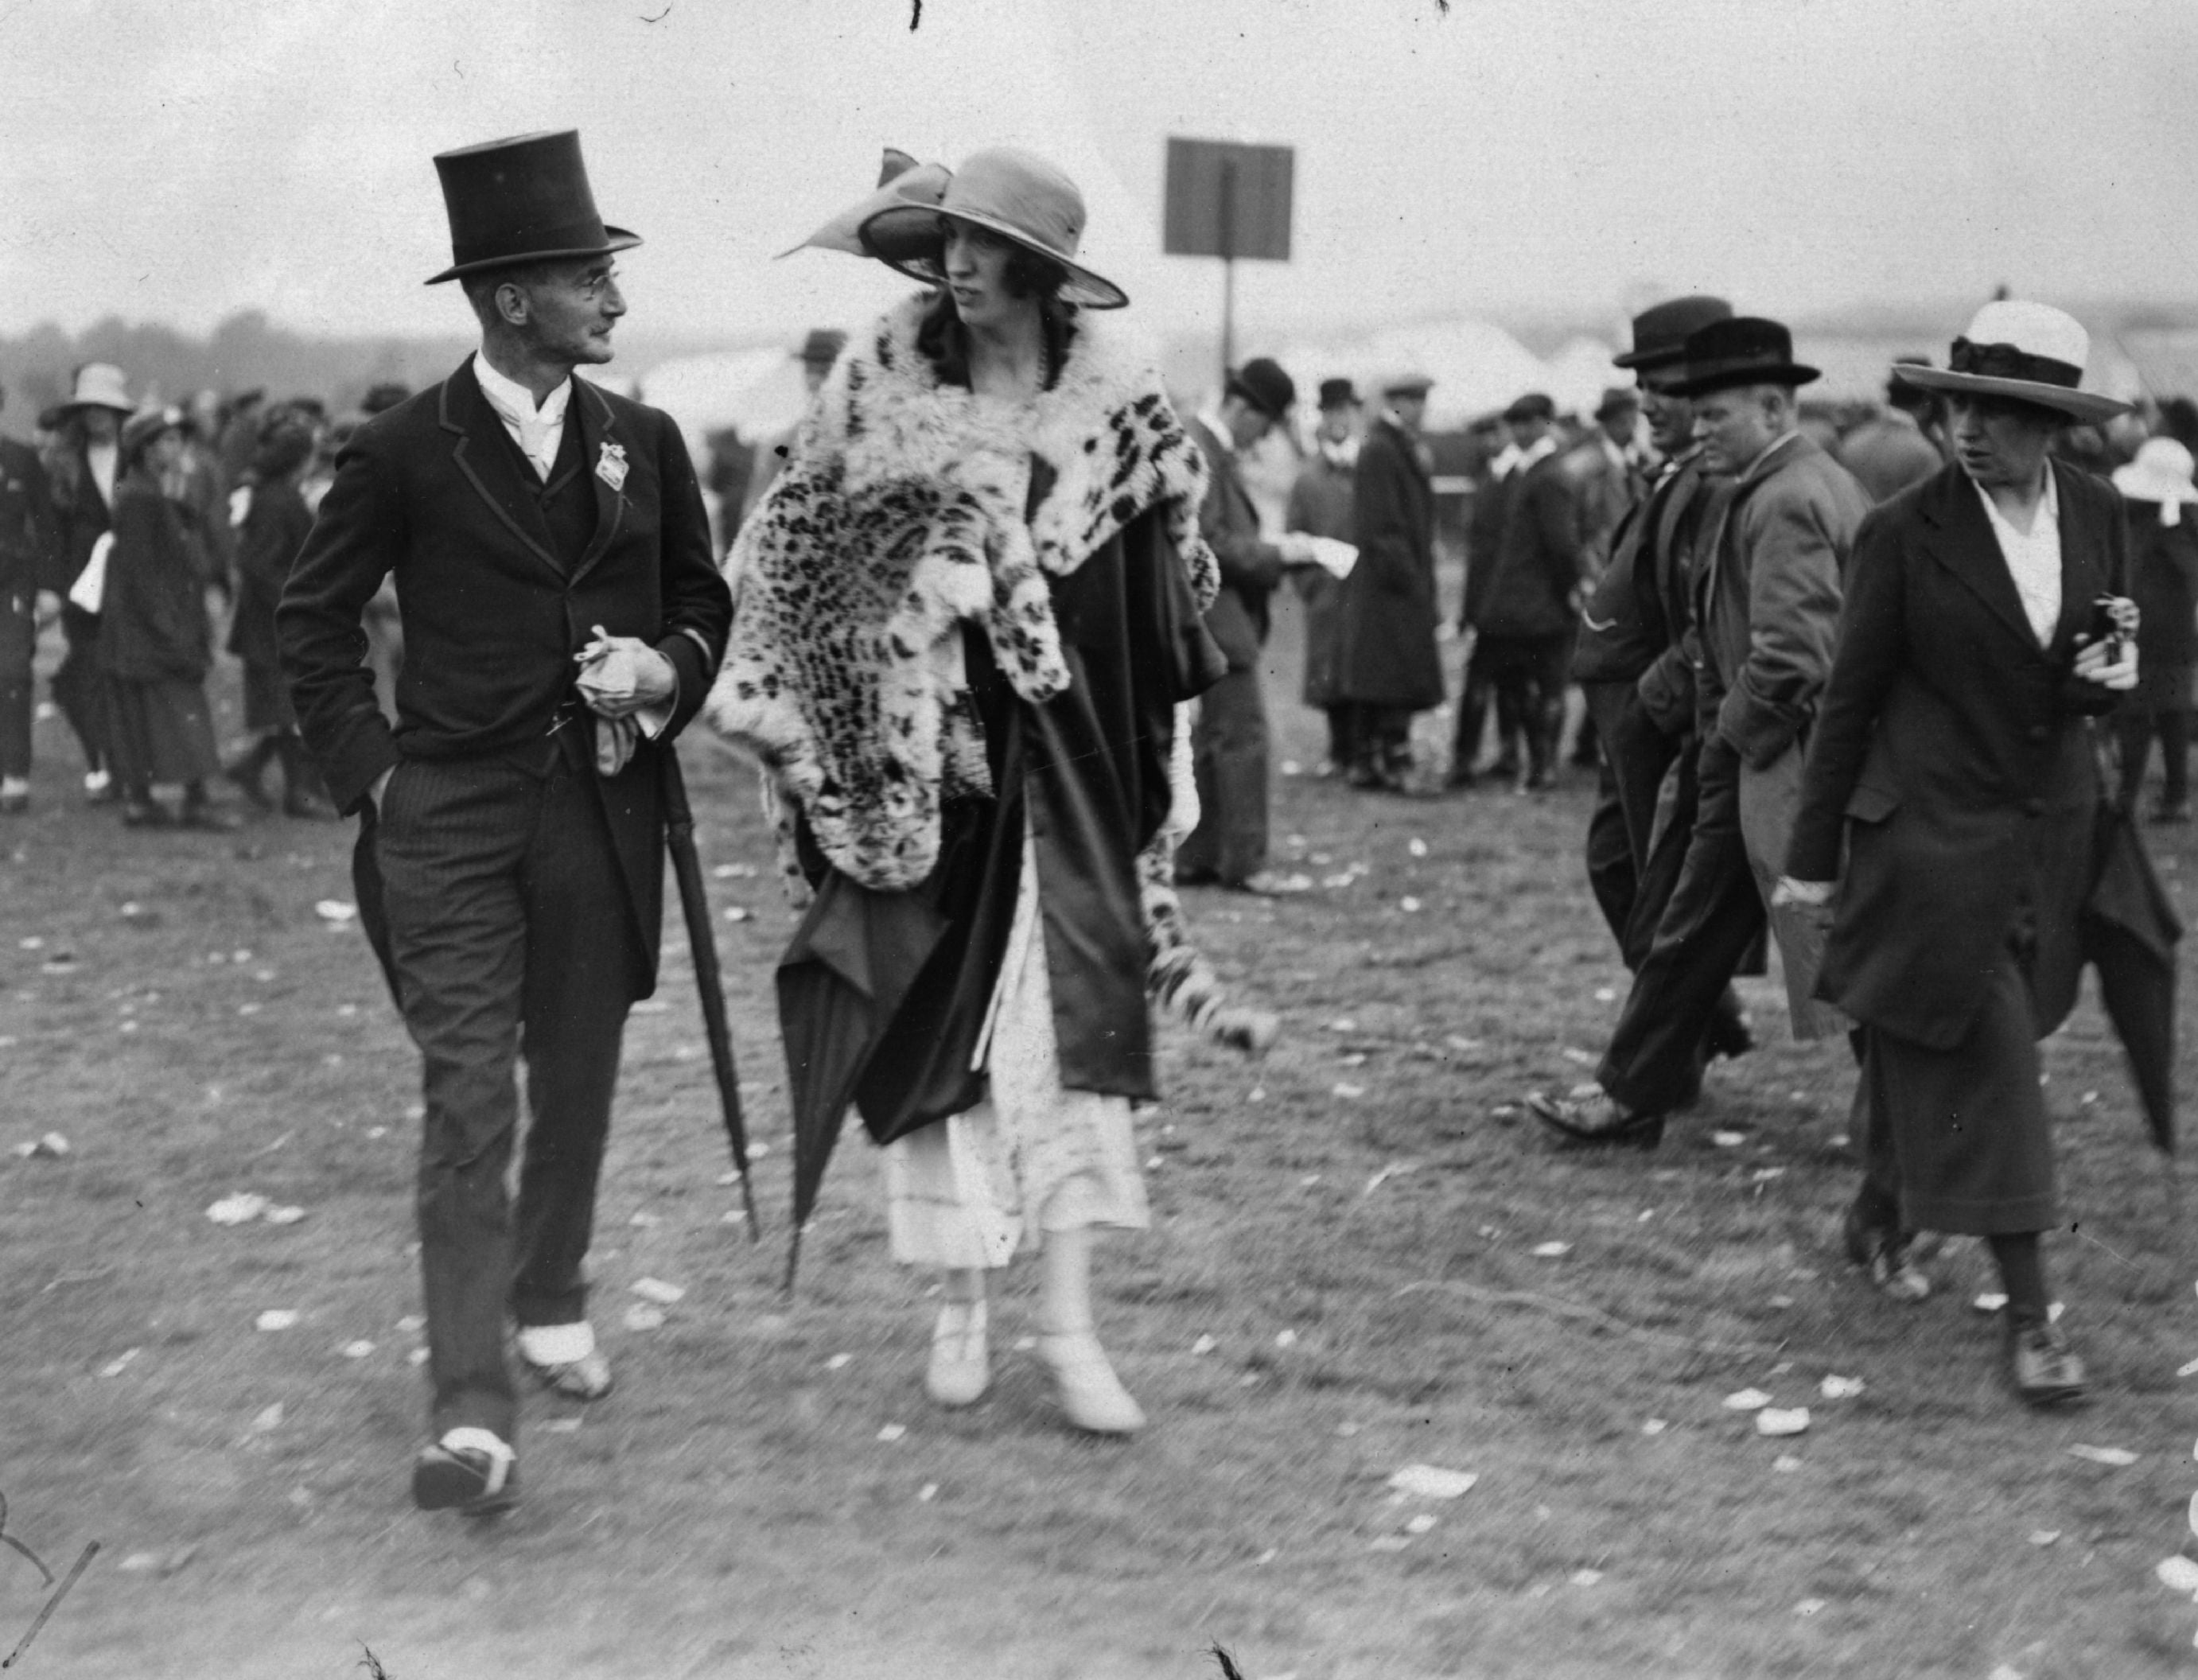 June 1922: Major and Mrs Hedges stride purposefully about in their finery at Ascot